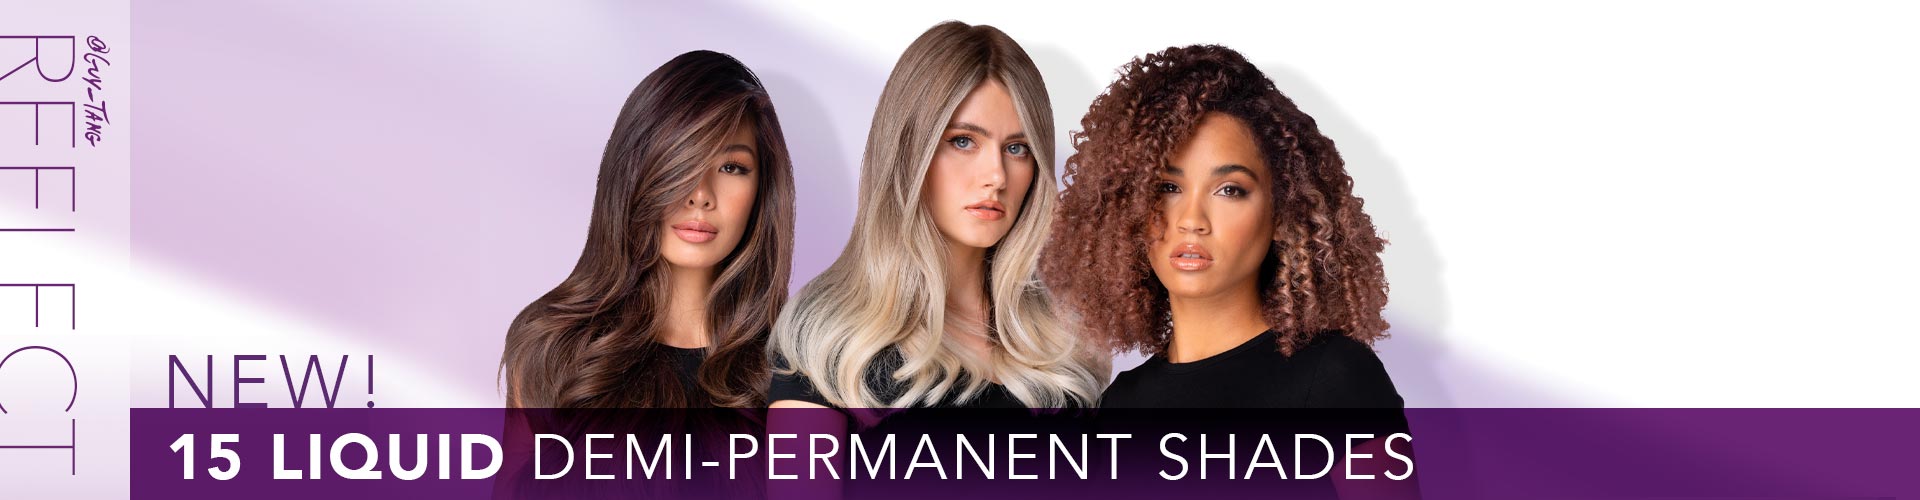 Demi-Permanent vs. Permanent Hair Color: Which is best for me?